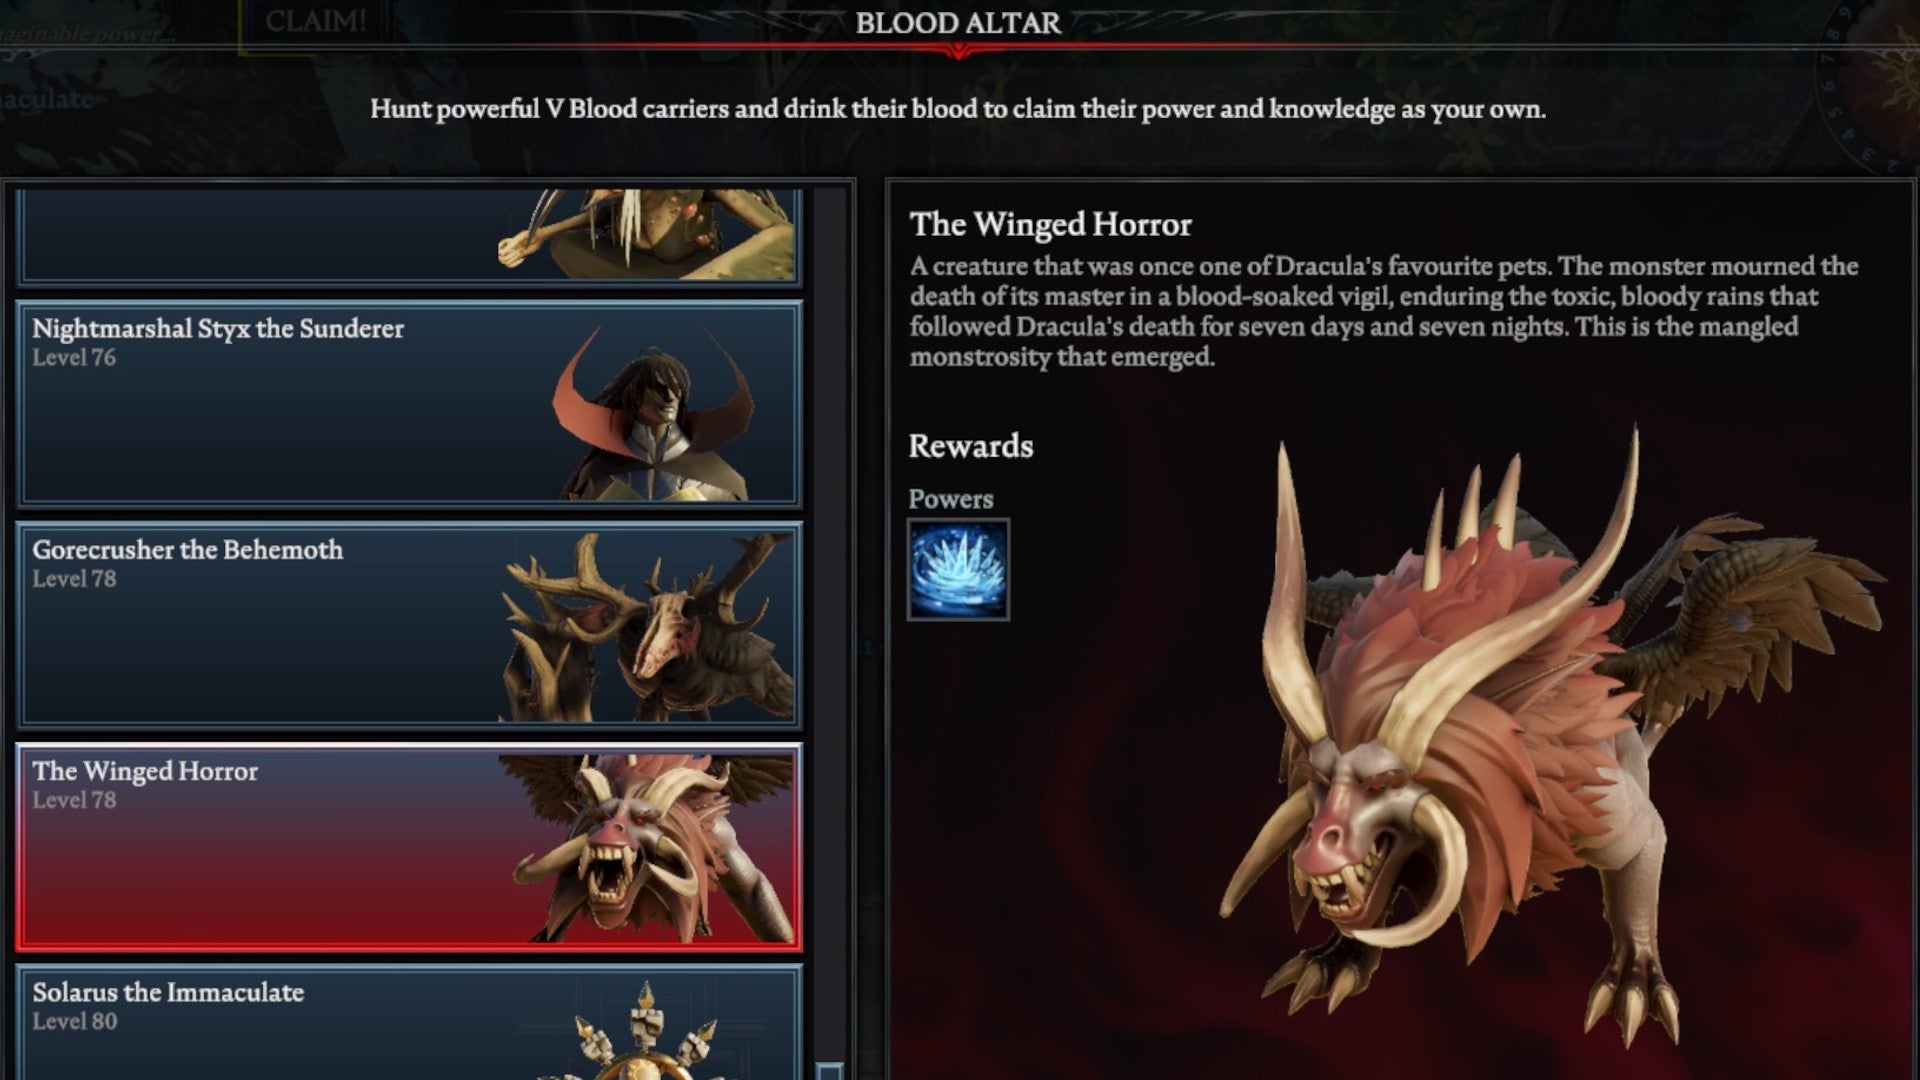 V Rising Winged Horror Blood Altar tracking page, showing an image of the manticore on the right and a list of bosses on the left